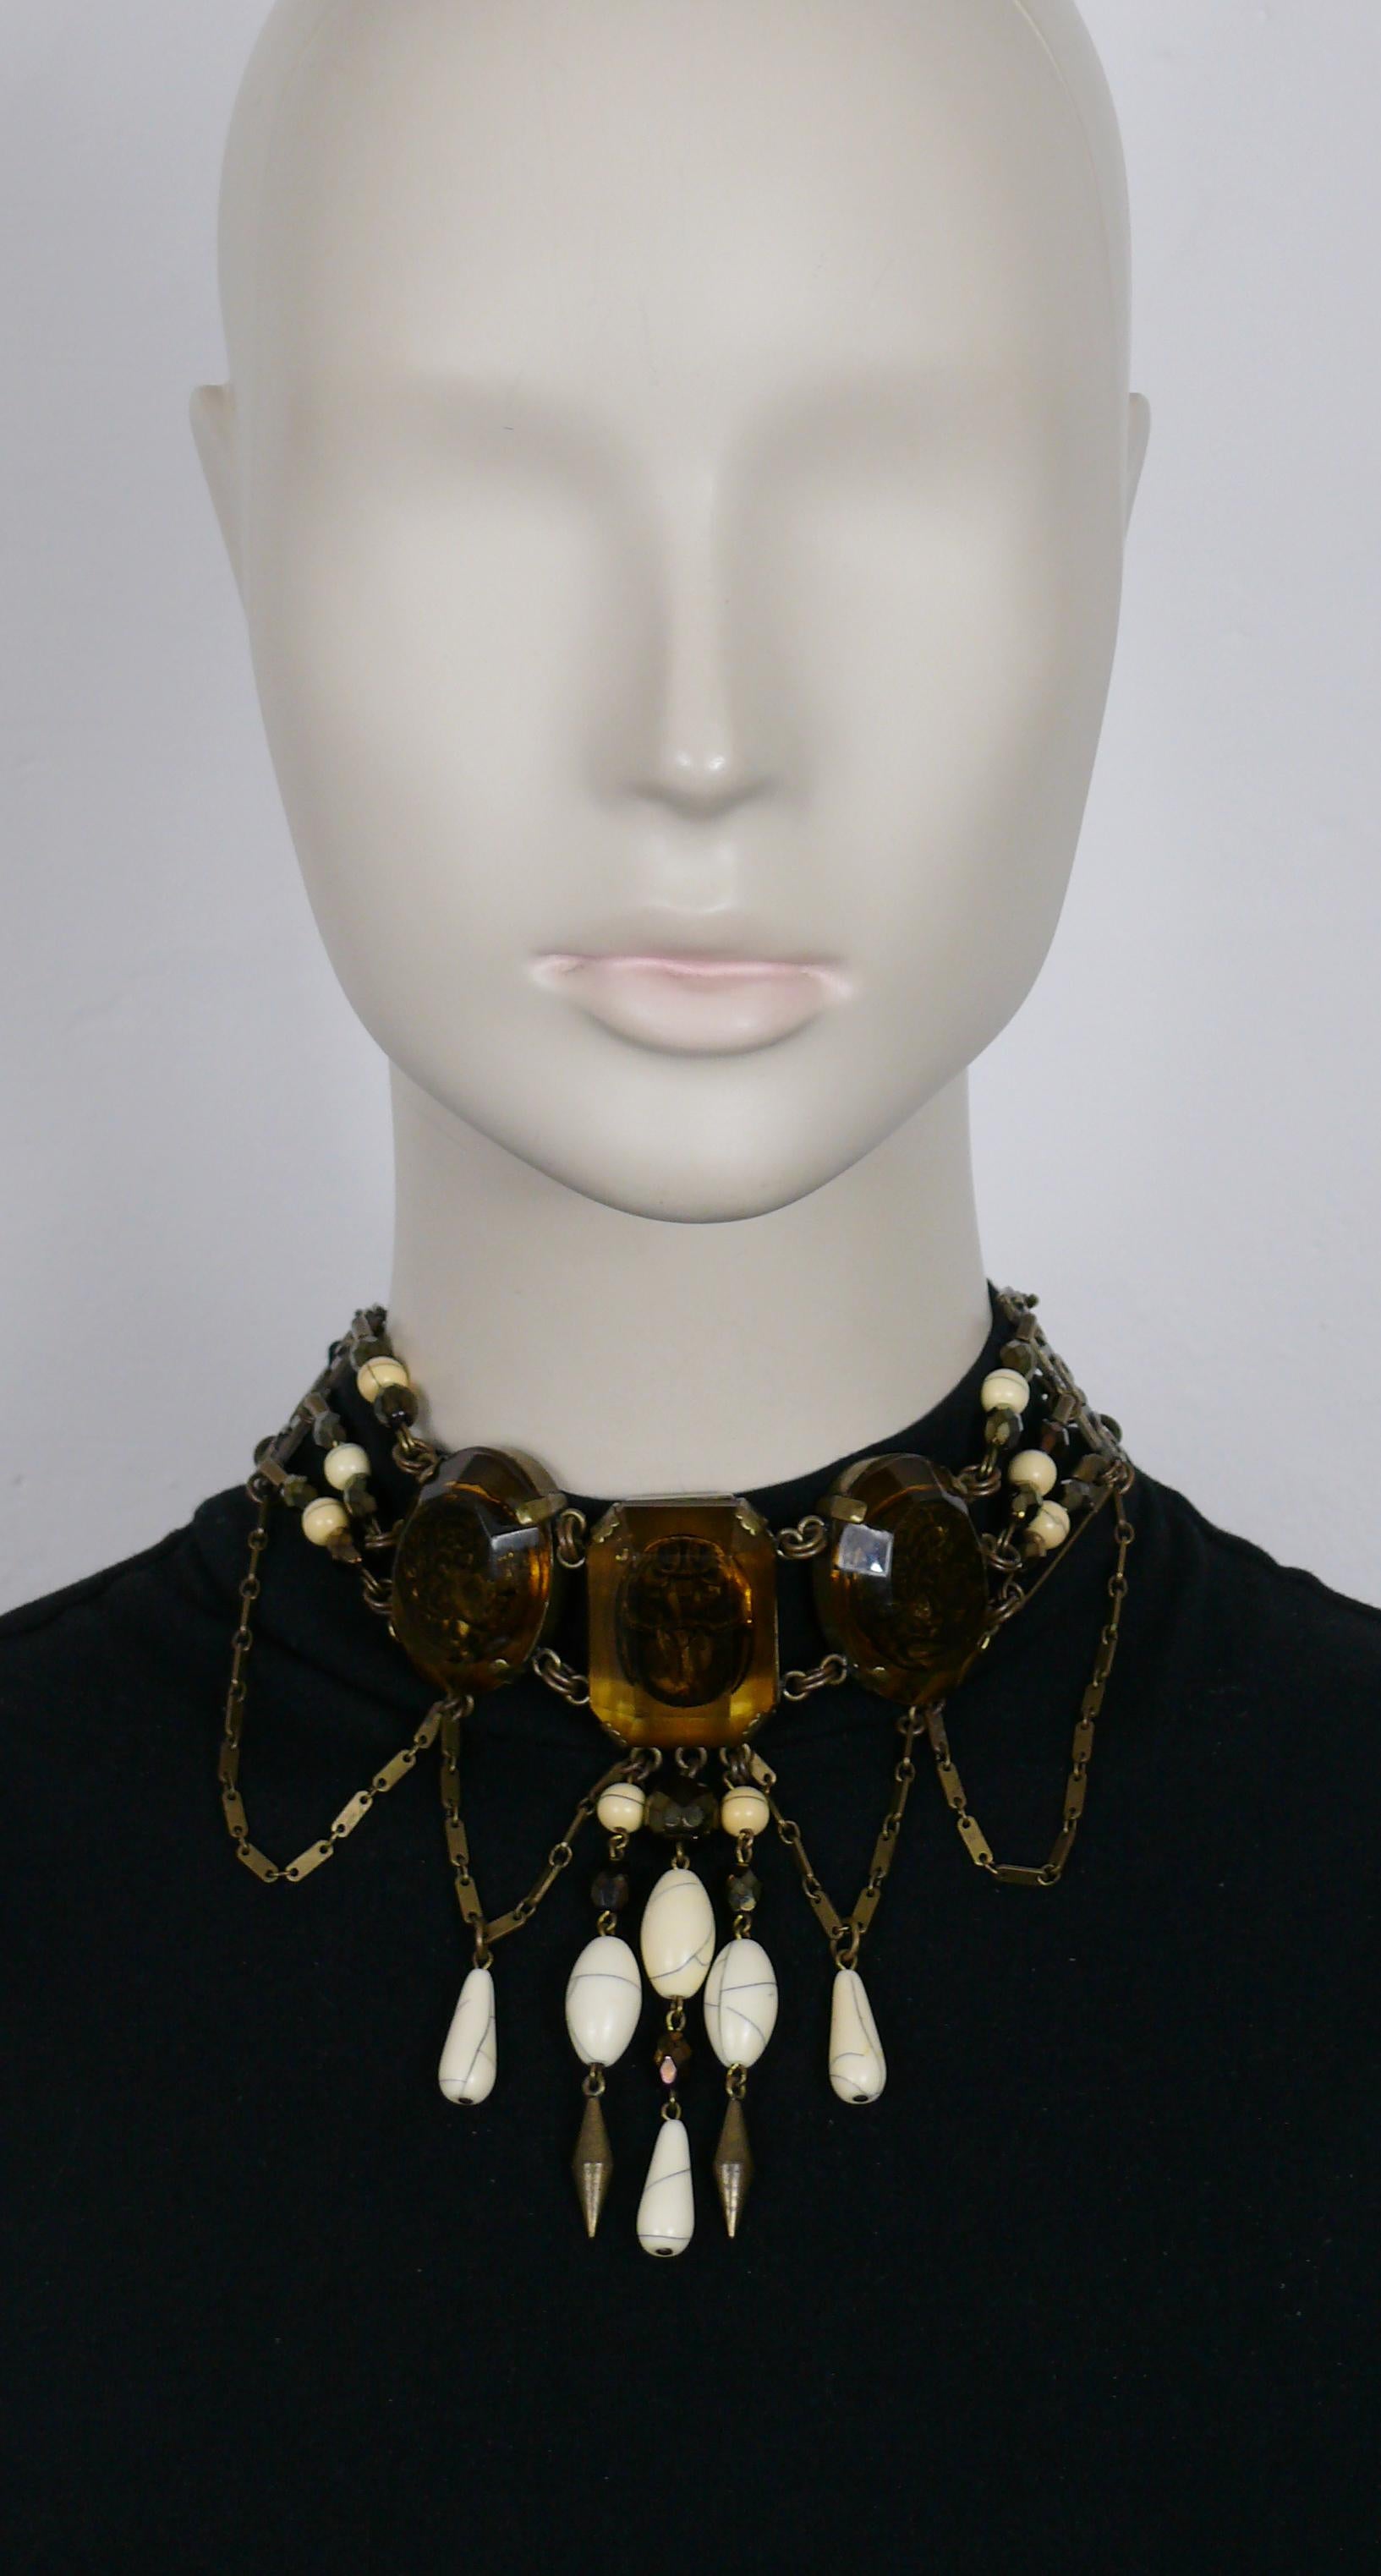 JEAN PAUL GAULTIER vintage antiqued bronze tone choker necklace featuring 3 amber color resin cameos links featuring inlaids with scarab and ancient roman cameo profiles, safety pins, facetted bronze color glass beads, cracked off-white beads, metal